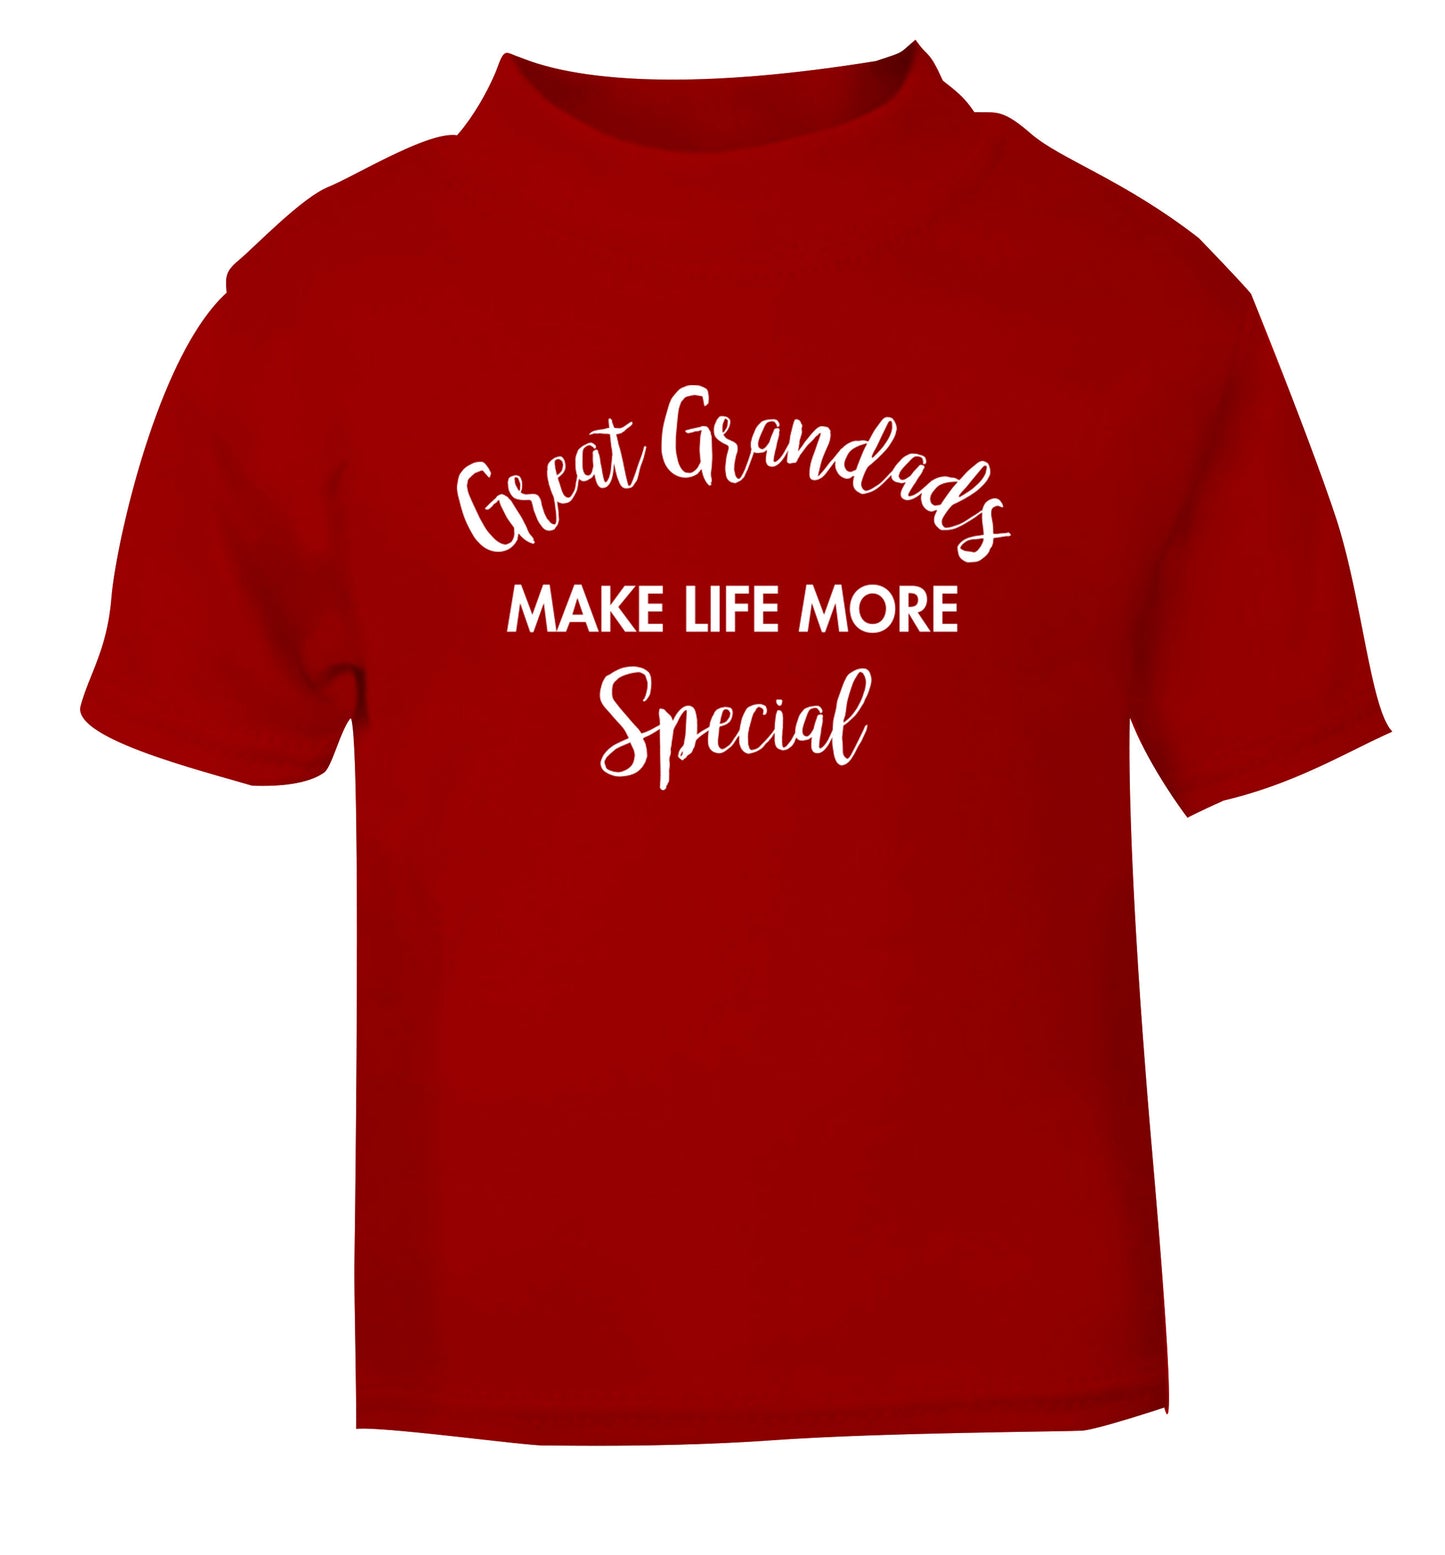 Great Grandads make life more special red Baby Toddler Tshirt 2 Years